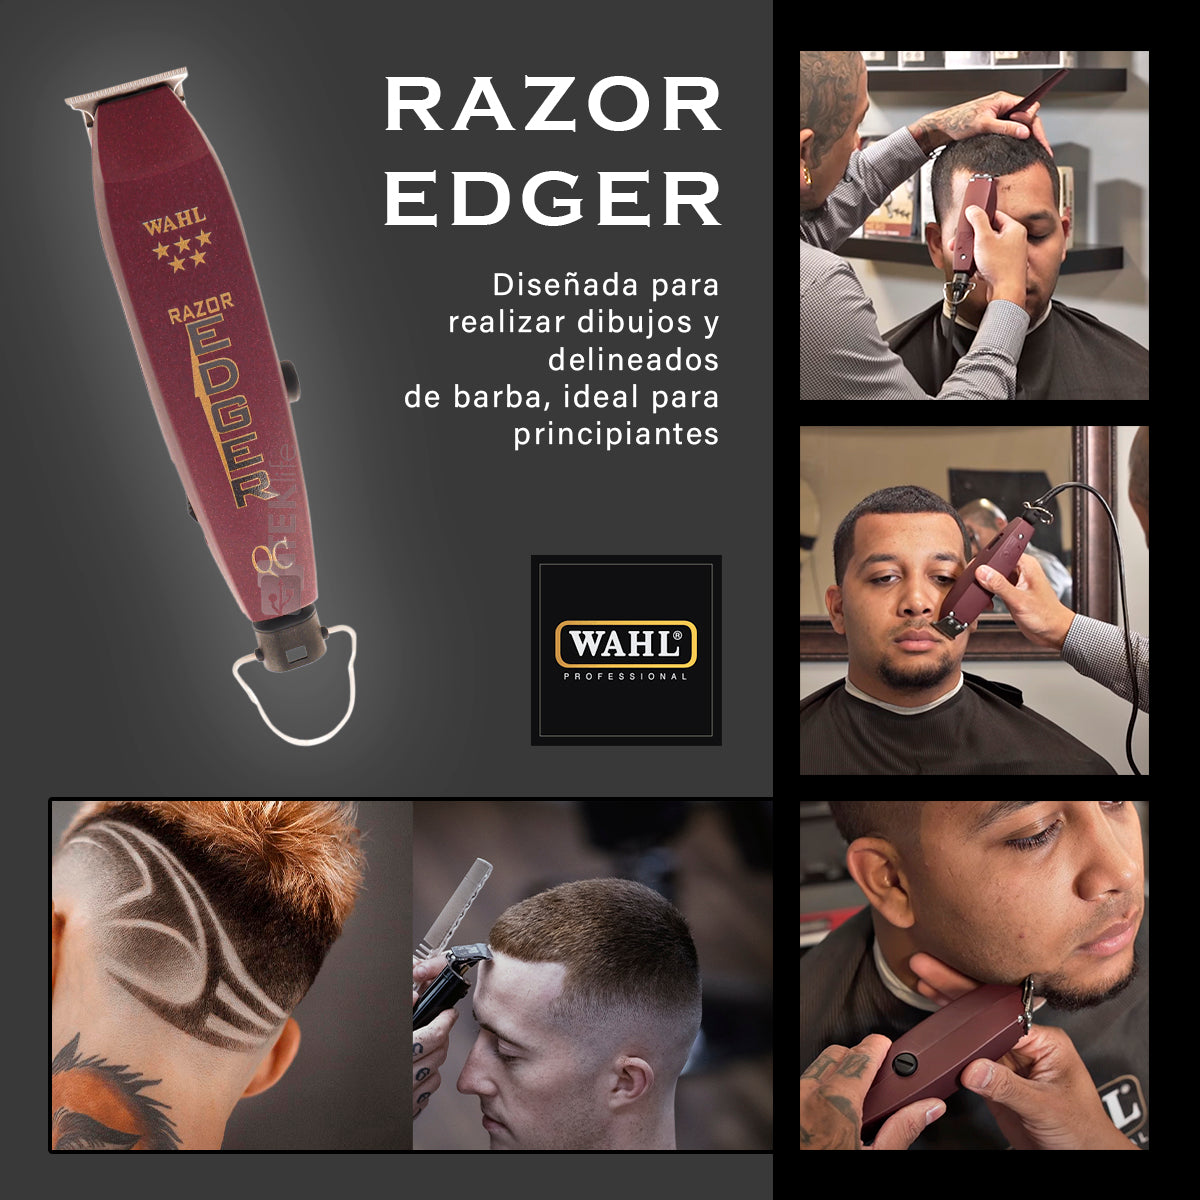 Combo Wahl Unicord Clipper y Trimmer